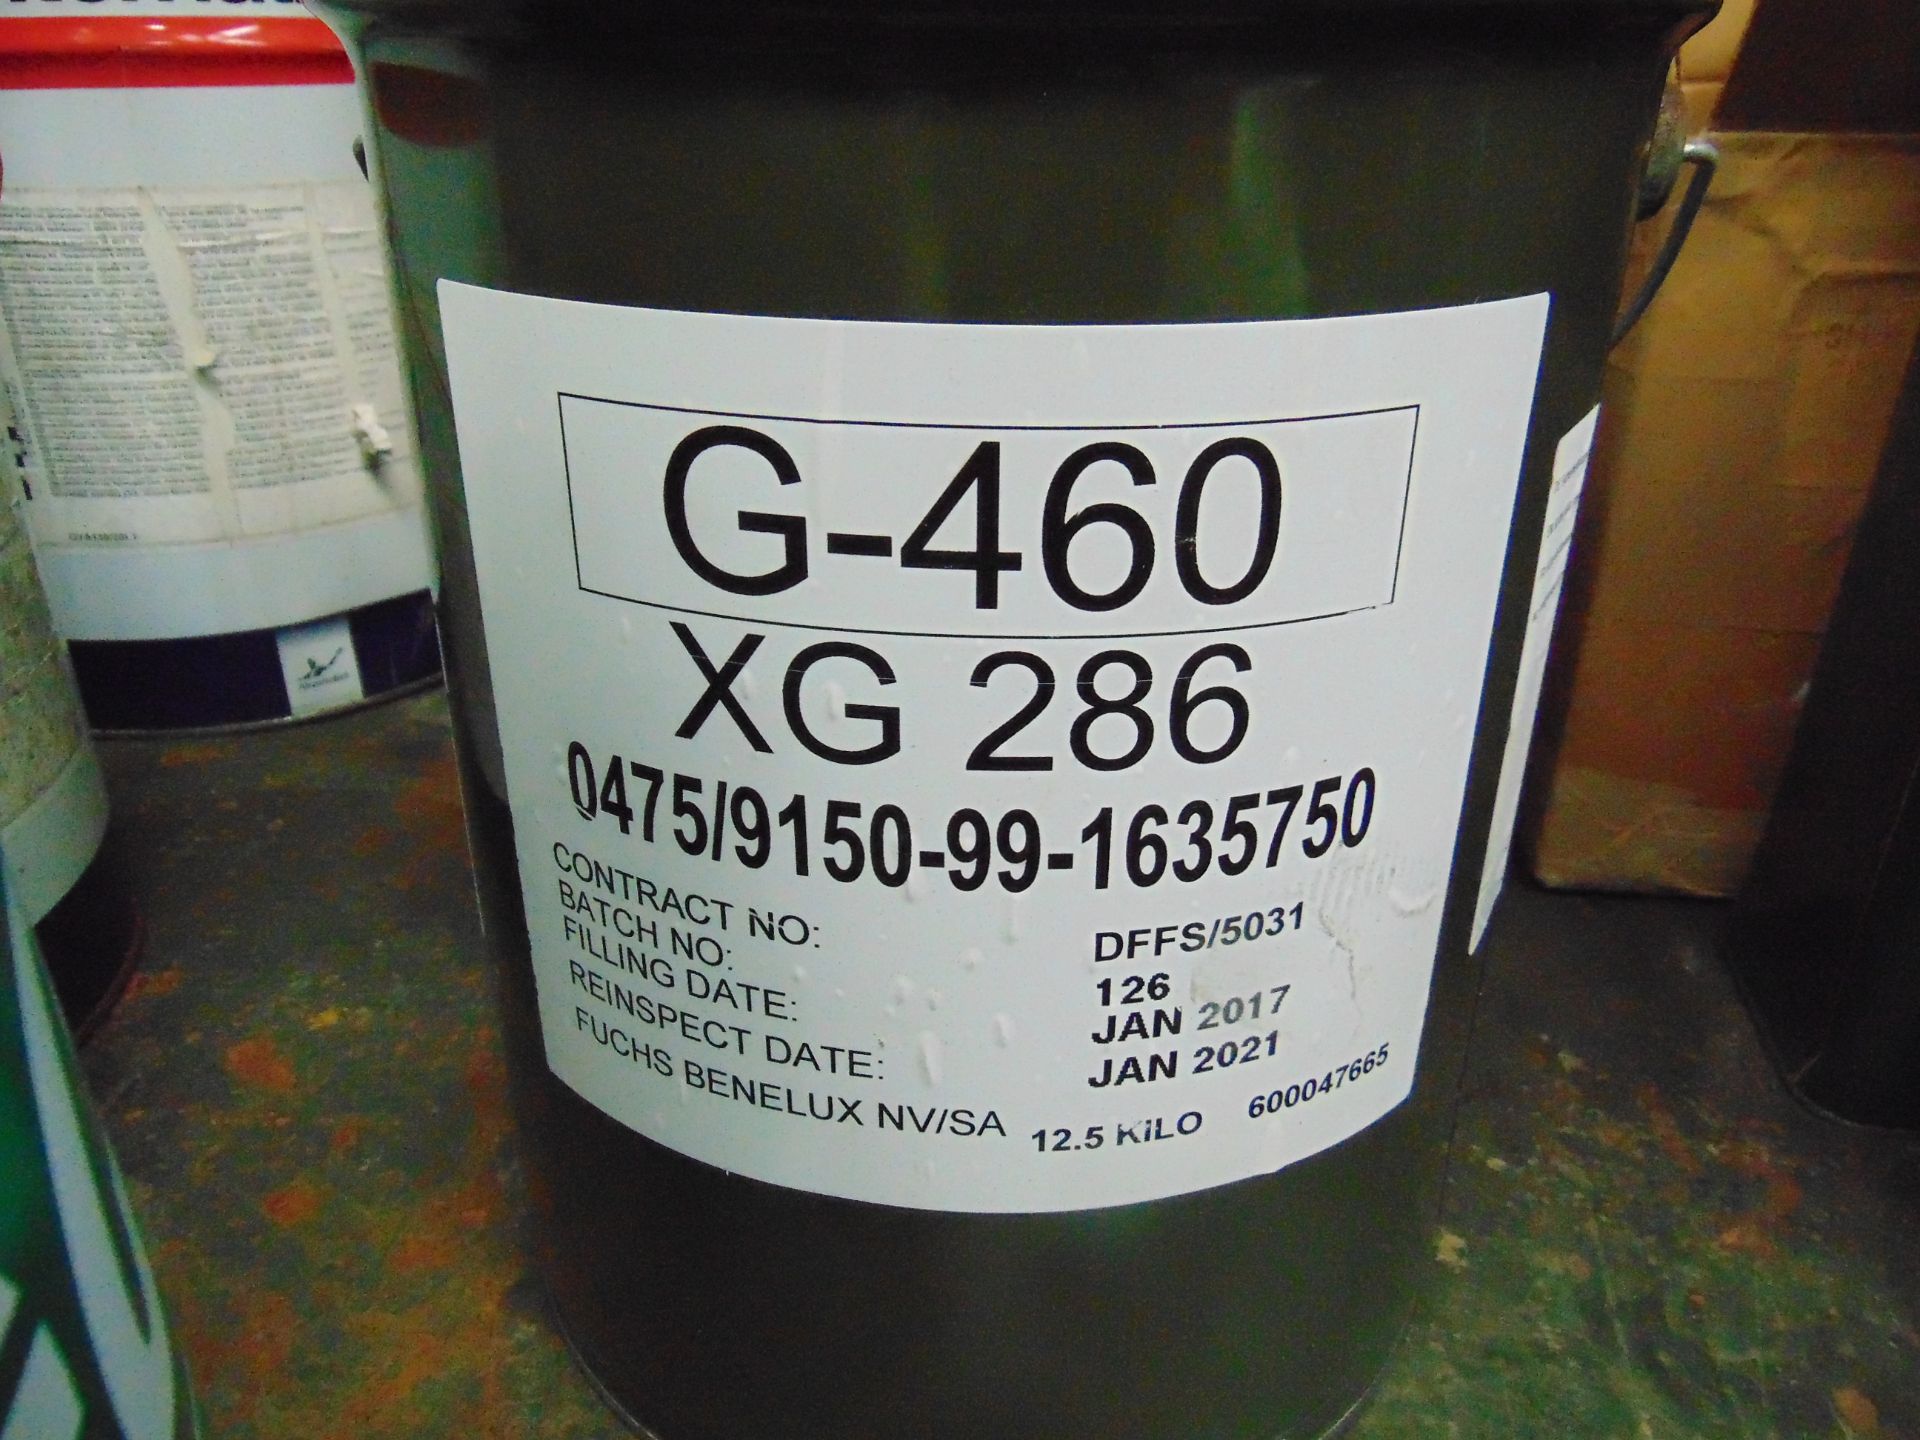 3X 12.5 KGS DRUMS OF GENERAL PURPOSE GRAPHITE GREASE XG 286 SUITABLE FOR AIRCRAFT, VEHICLES, ETC. - Image 3 of 3